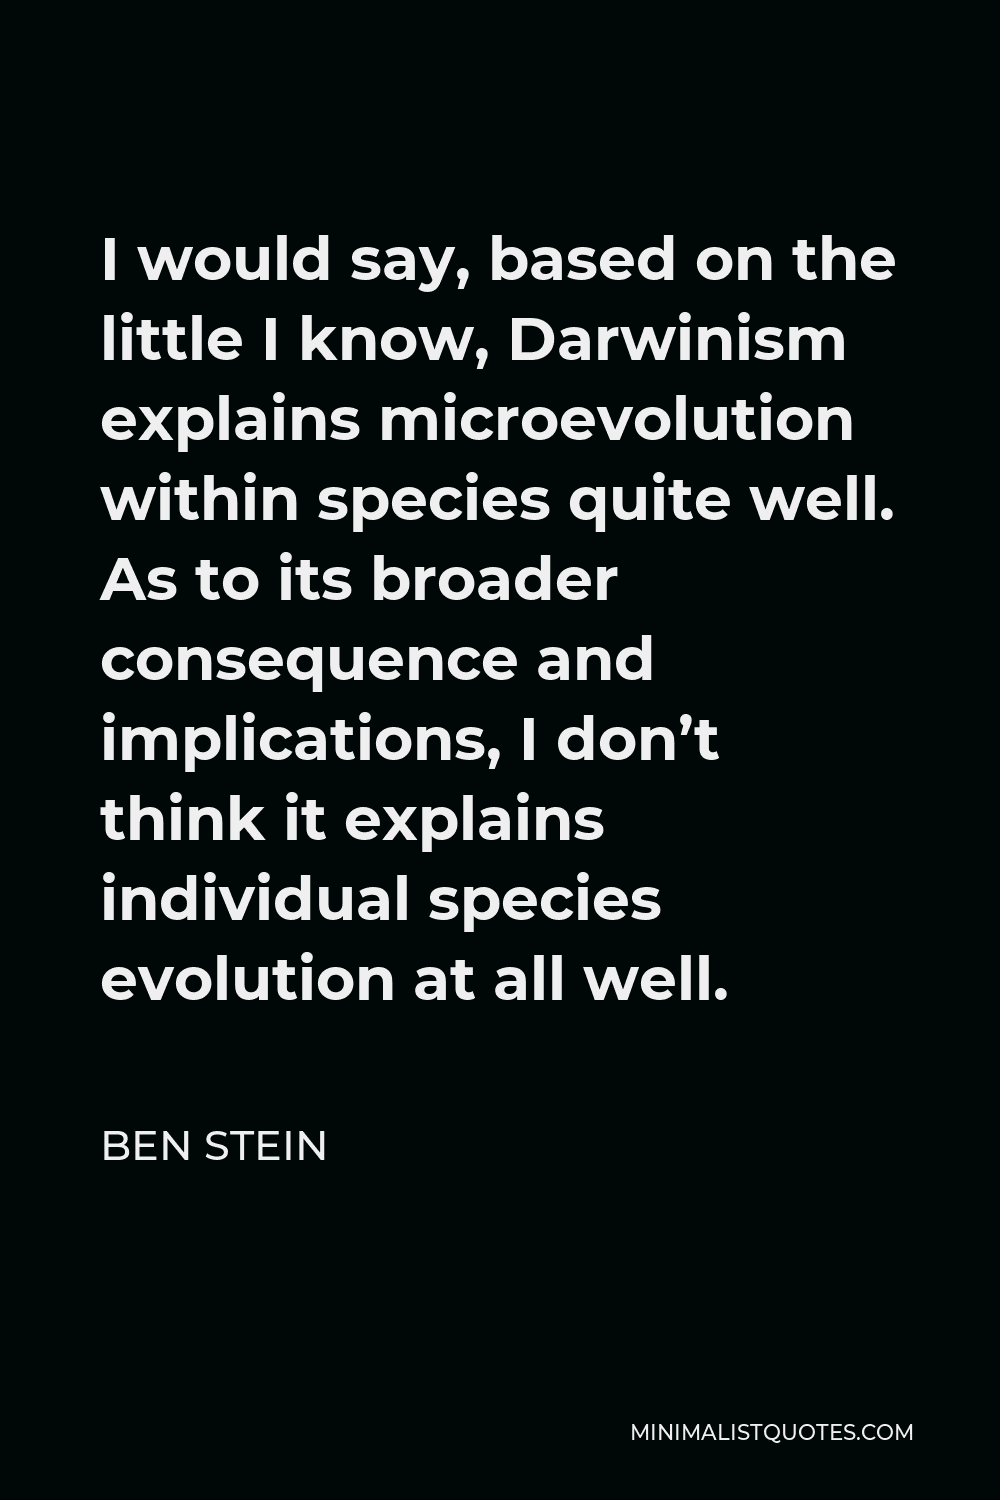 Ben Stein Quote - I would say, based on the little I know, Darwinism explains microevolution within species quite well. As to its broader consequence and implications, I don’t think it explains individual species evolution at all well.